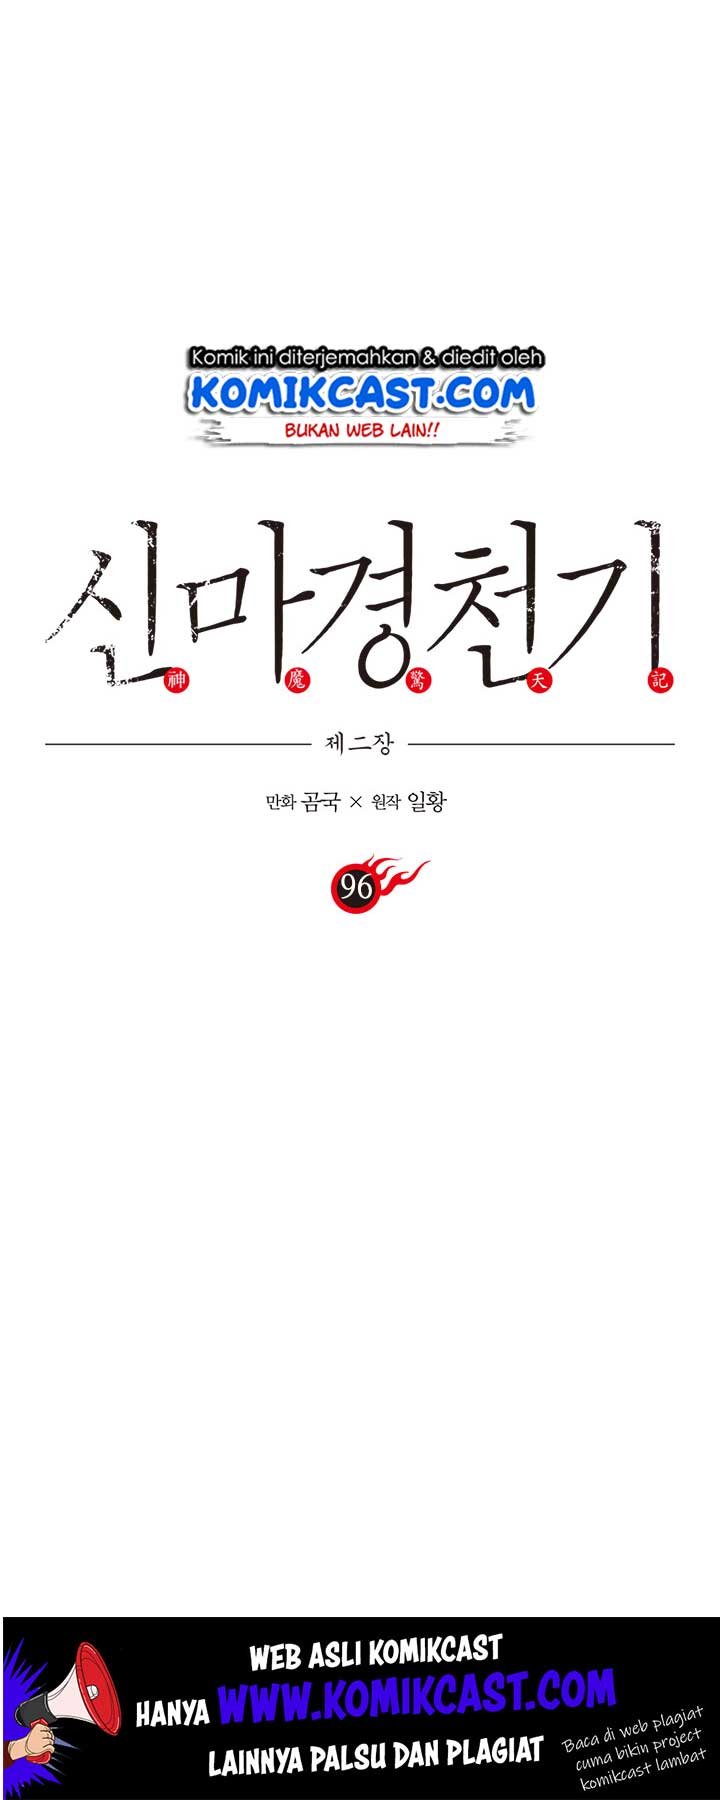 Chronicles of Heavenly Demon Chapter 96